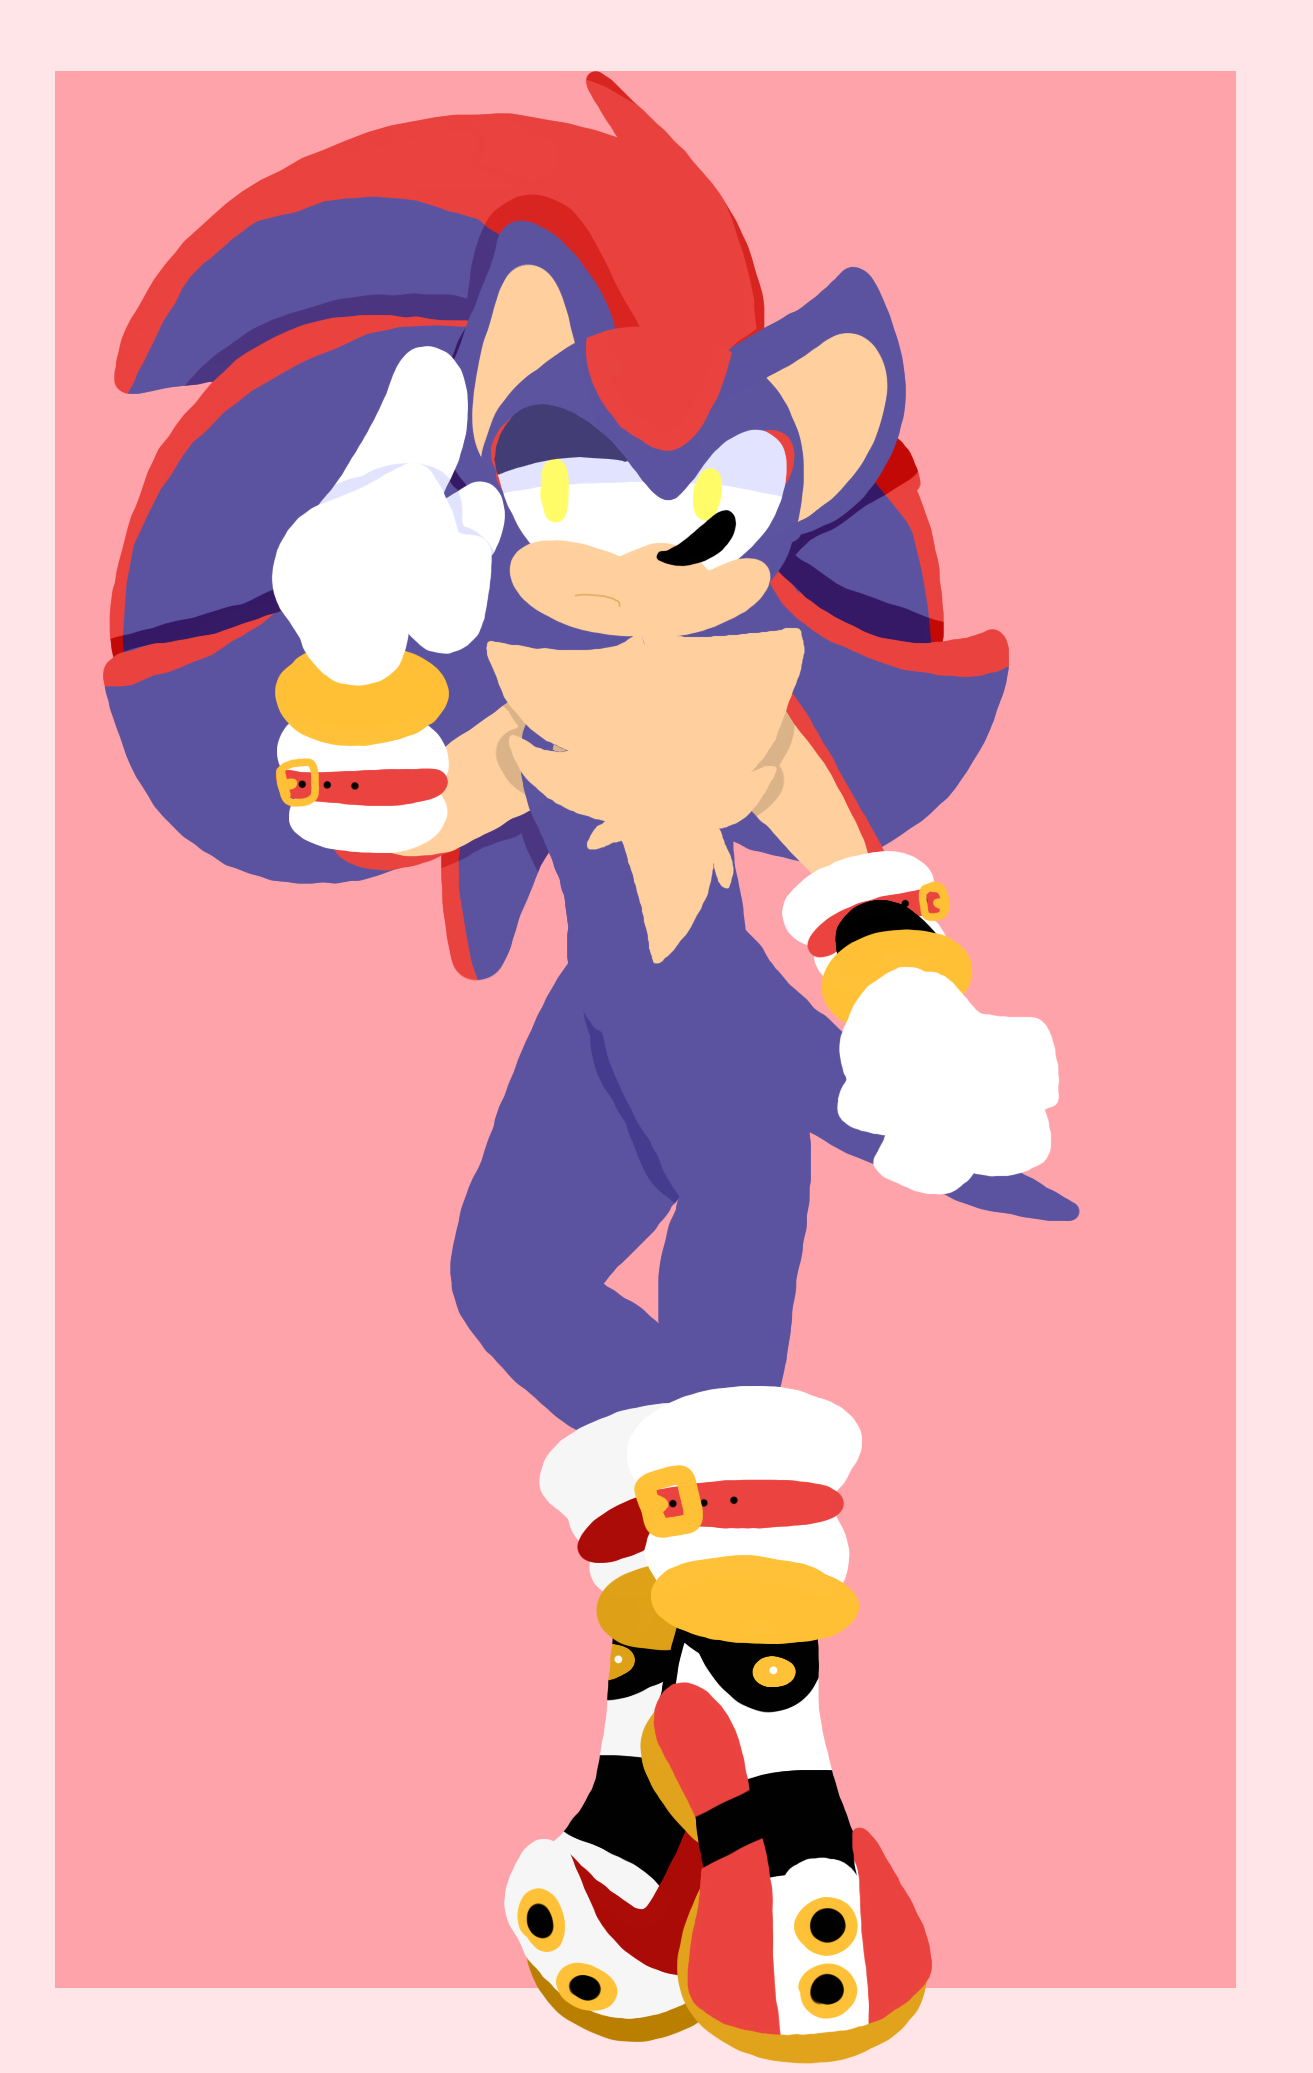 Sonic-Shadow Fusion Sketch by ihearrrtme on DeviantArt